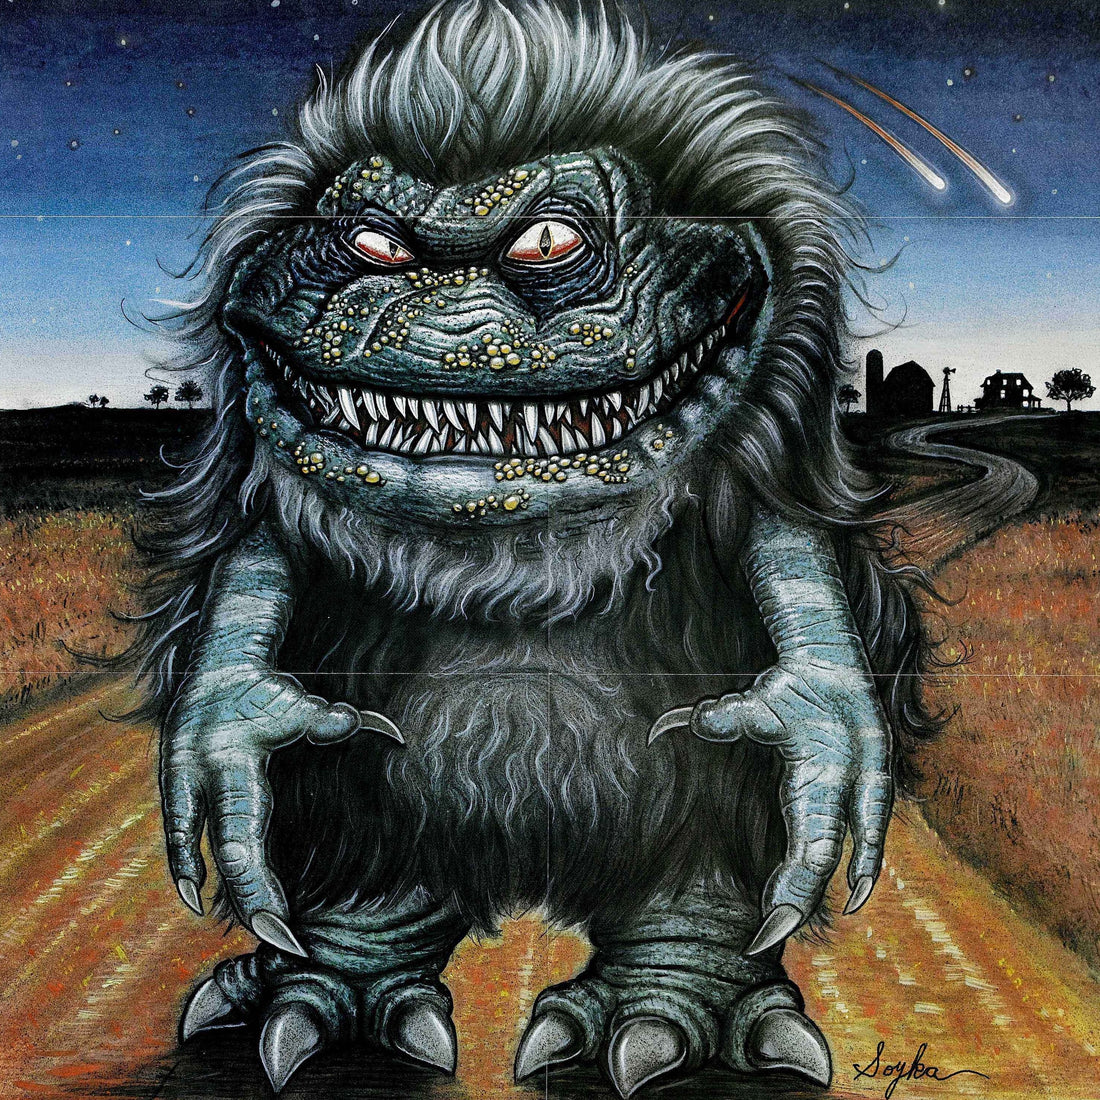 Episode 251: Critters